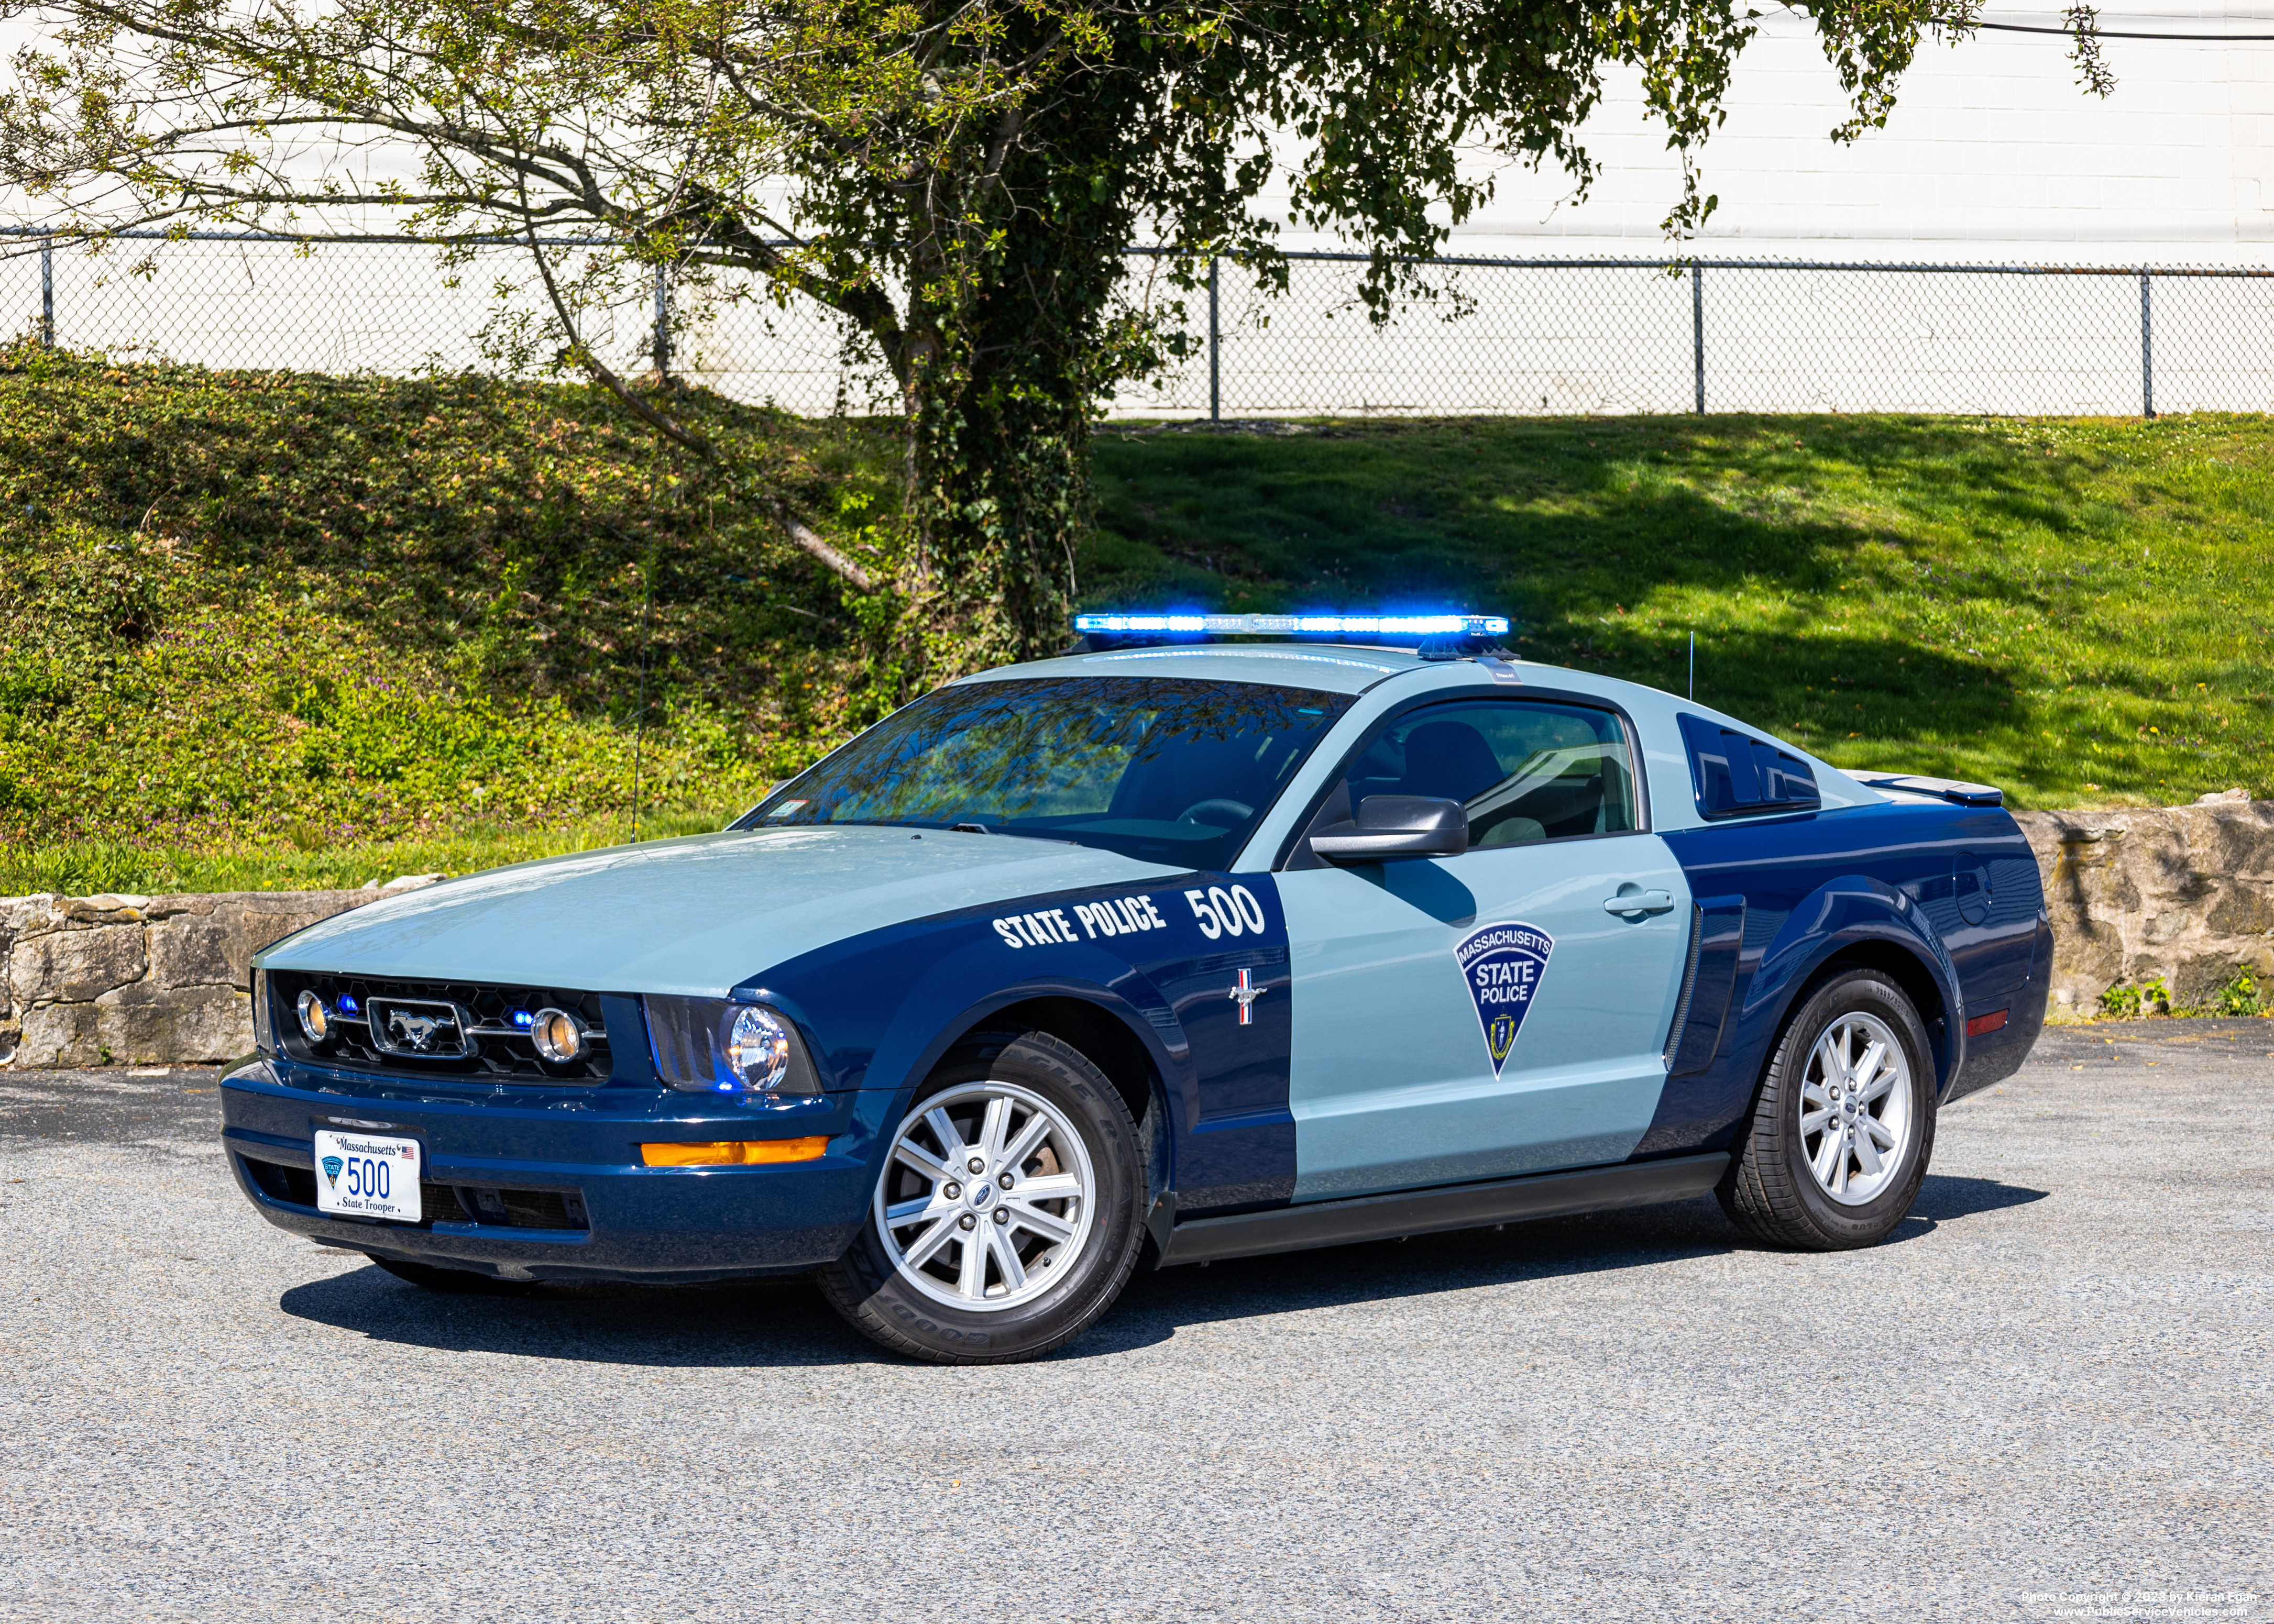 A photo  of Massachusetts State Police
            Cruiser 500, a 2006 Ford Mustang             taken by Kieran Egan